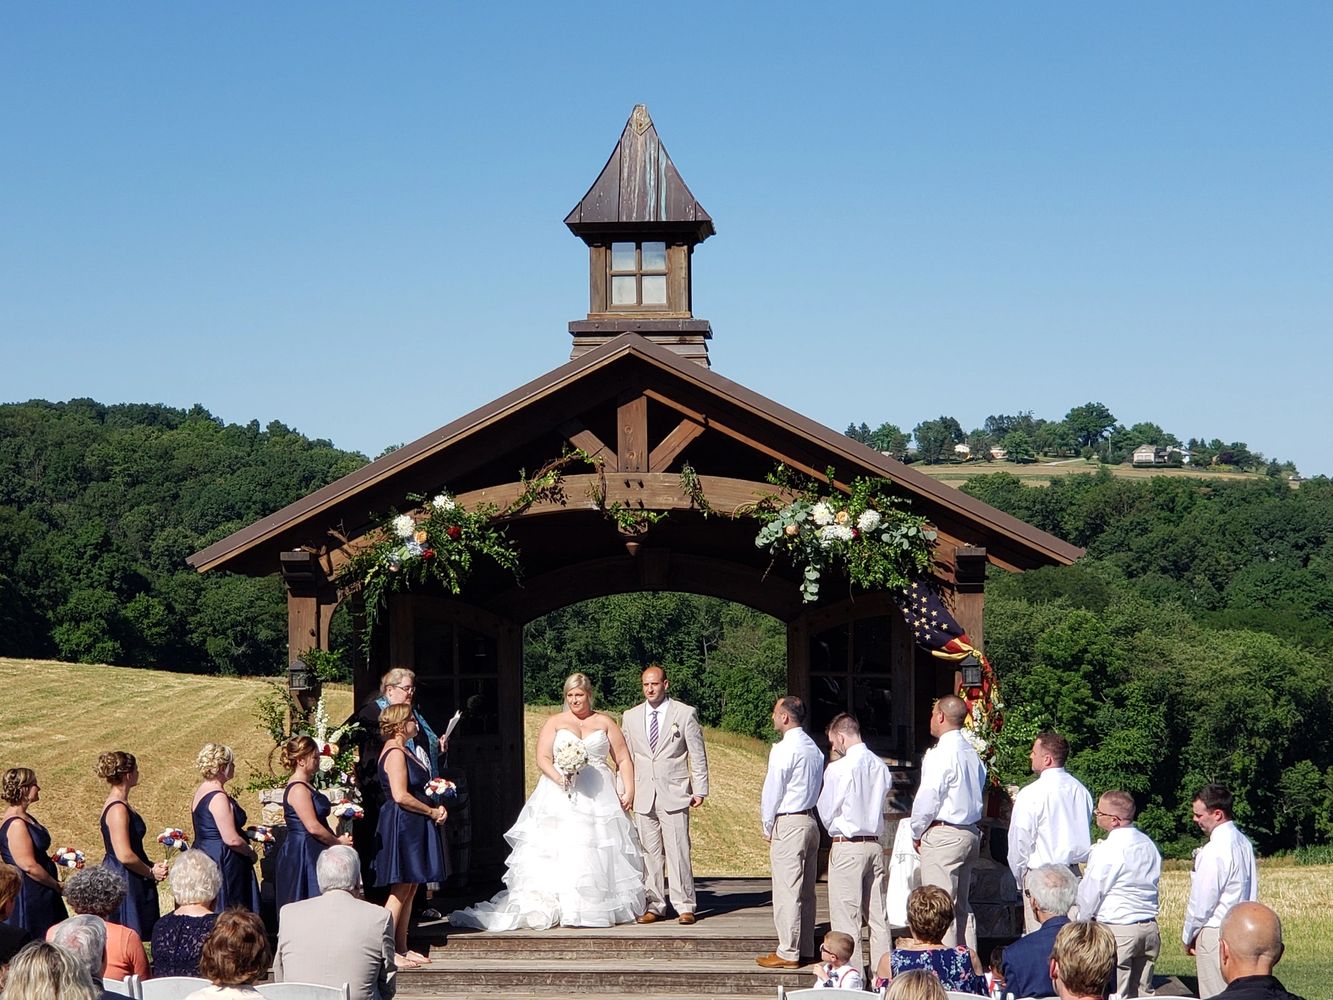 Wedding Officiant Central PA
Wedding Minister Central PA
Officiant Harrisburg PA
Mechanicsburg PA